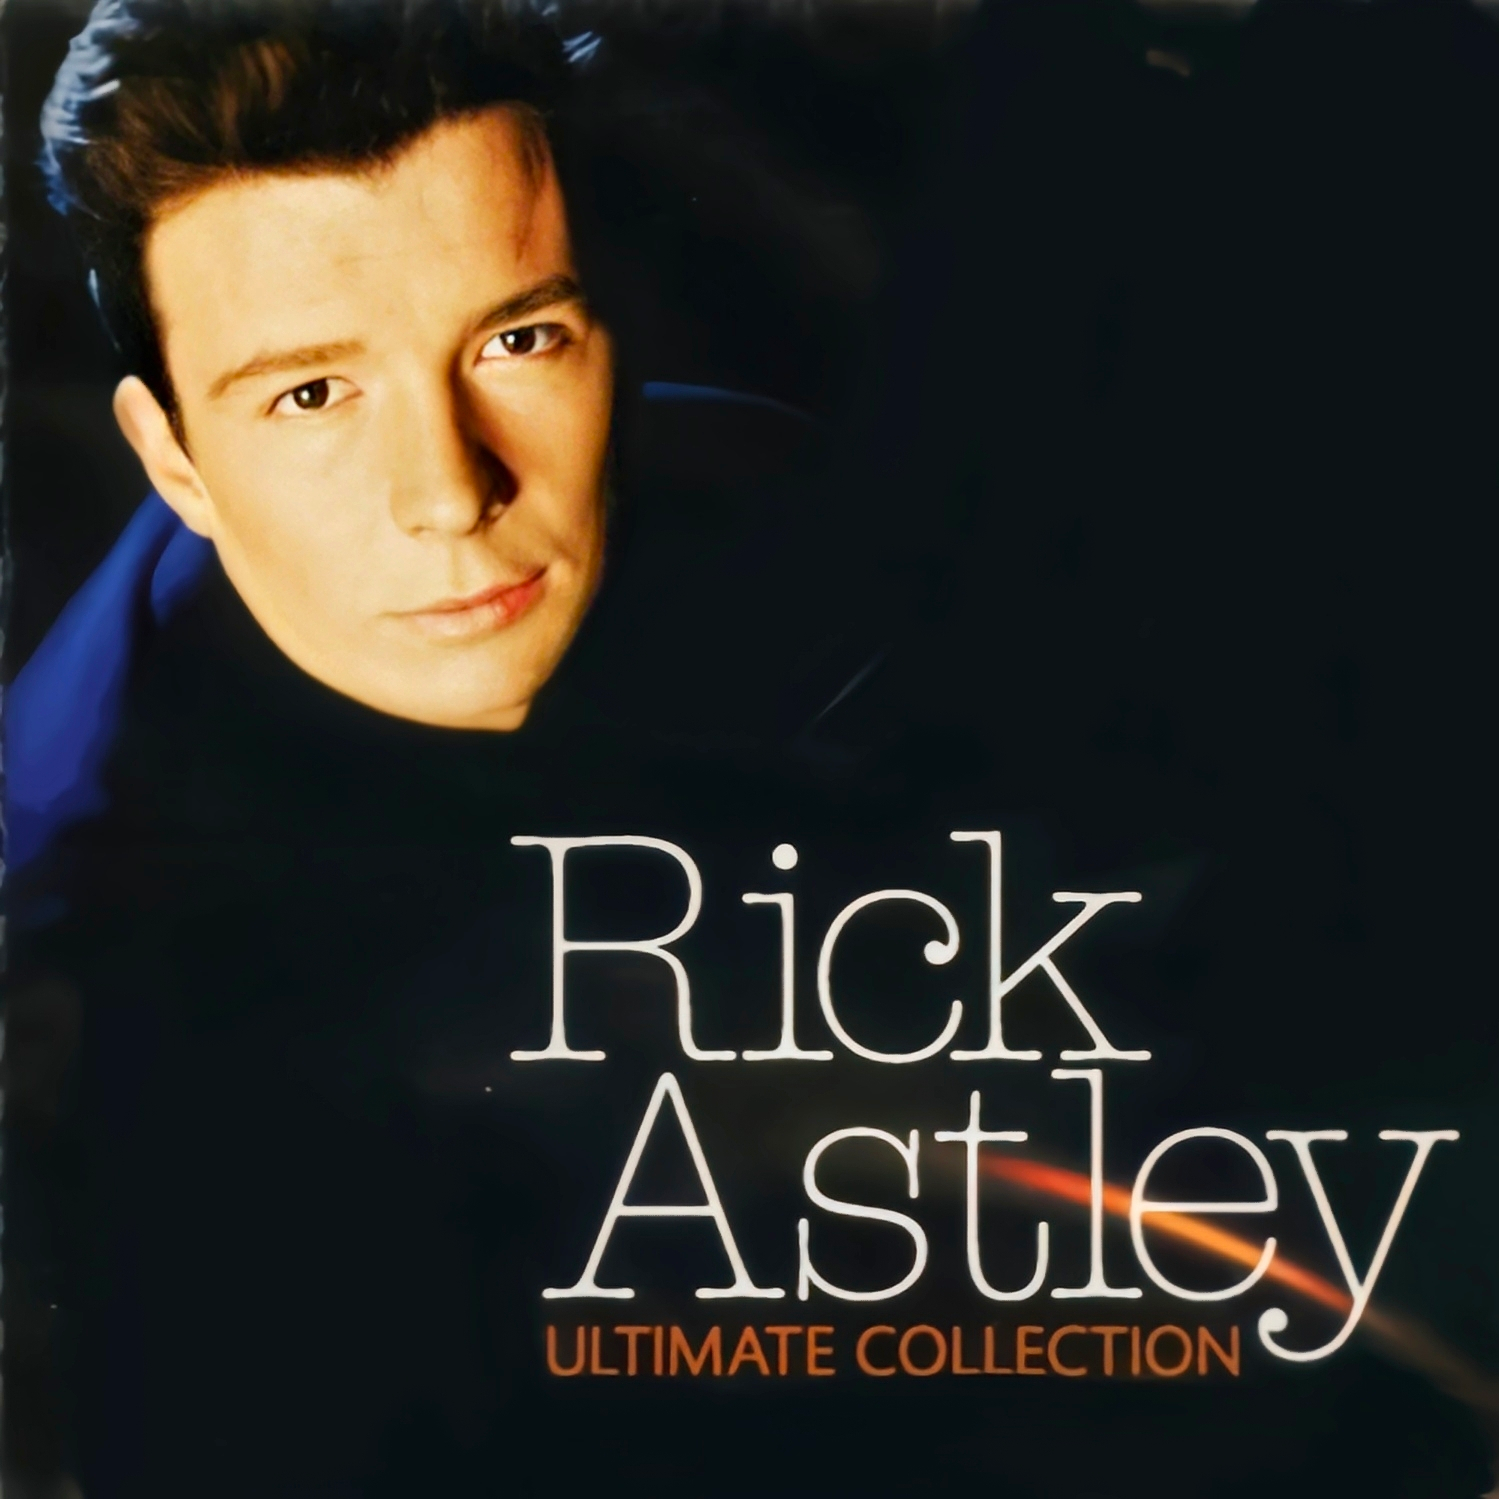 Rick Astley《Together Forever》[FLAC/MP3-320K]